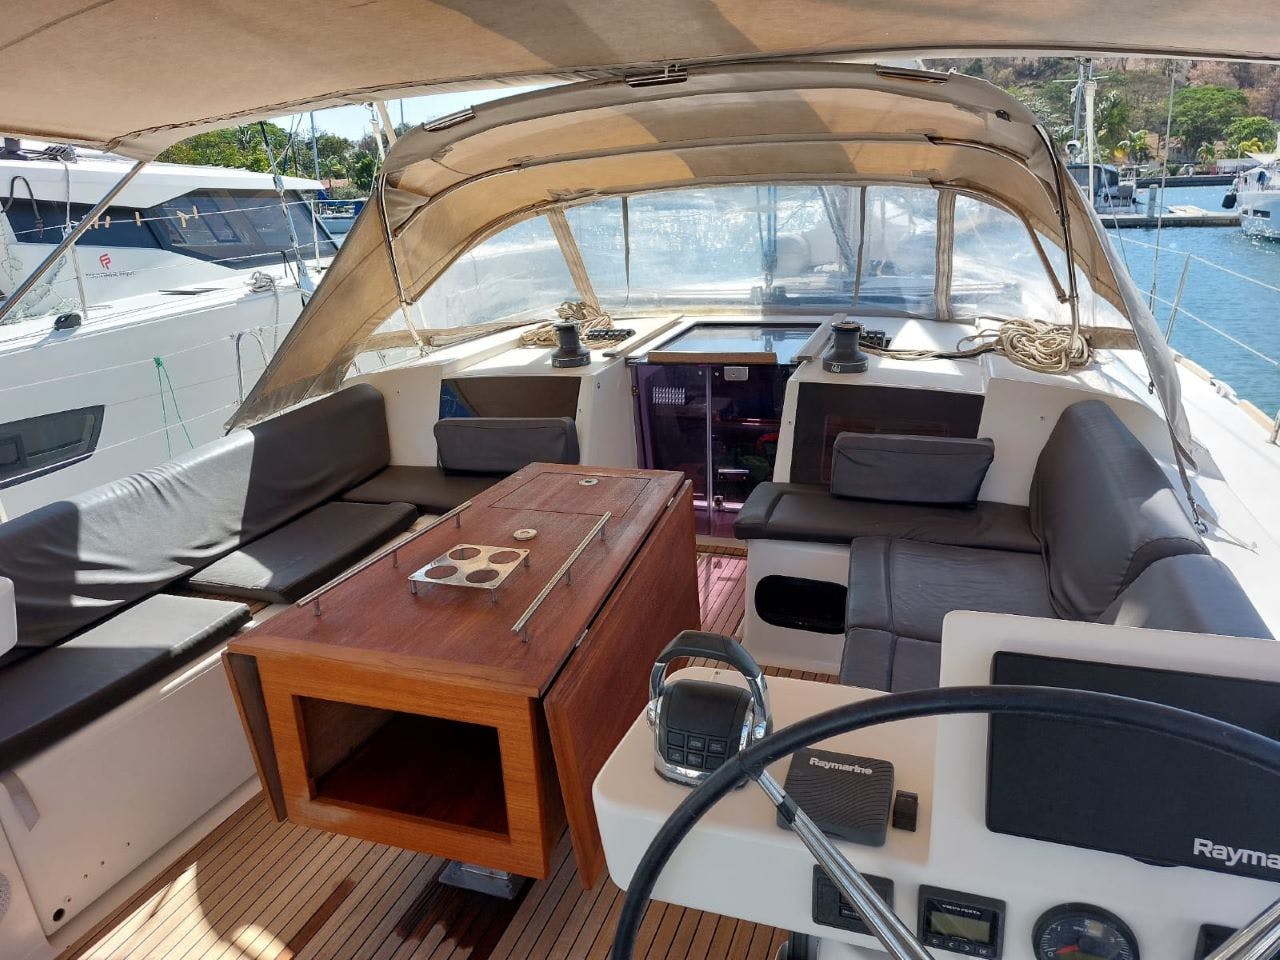 Book Dufour 520 GL Sailing yacht for bareboat charter in Guadeloupe, La Marina Bas du Fort, Guadeloupe, Caribbean with TripYacht!, picture 3